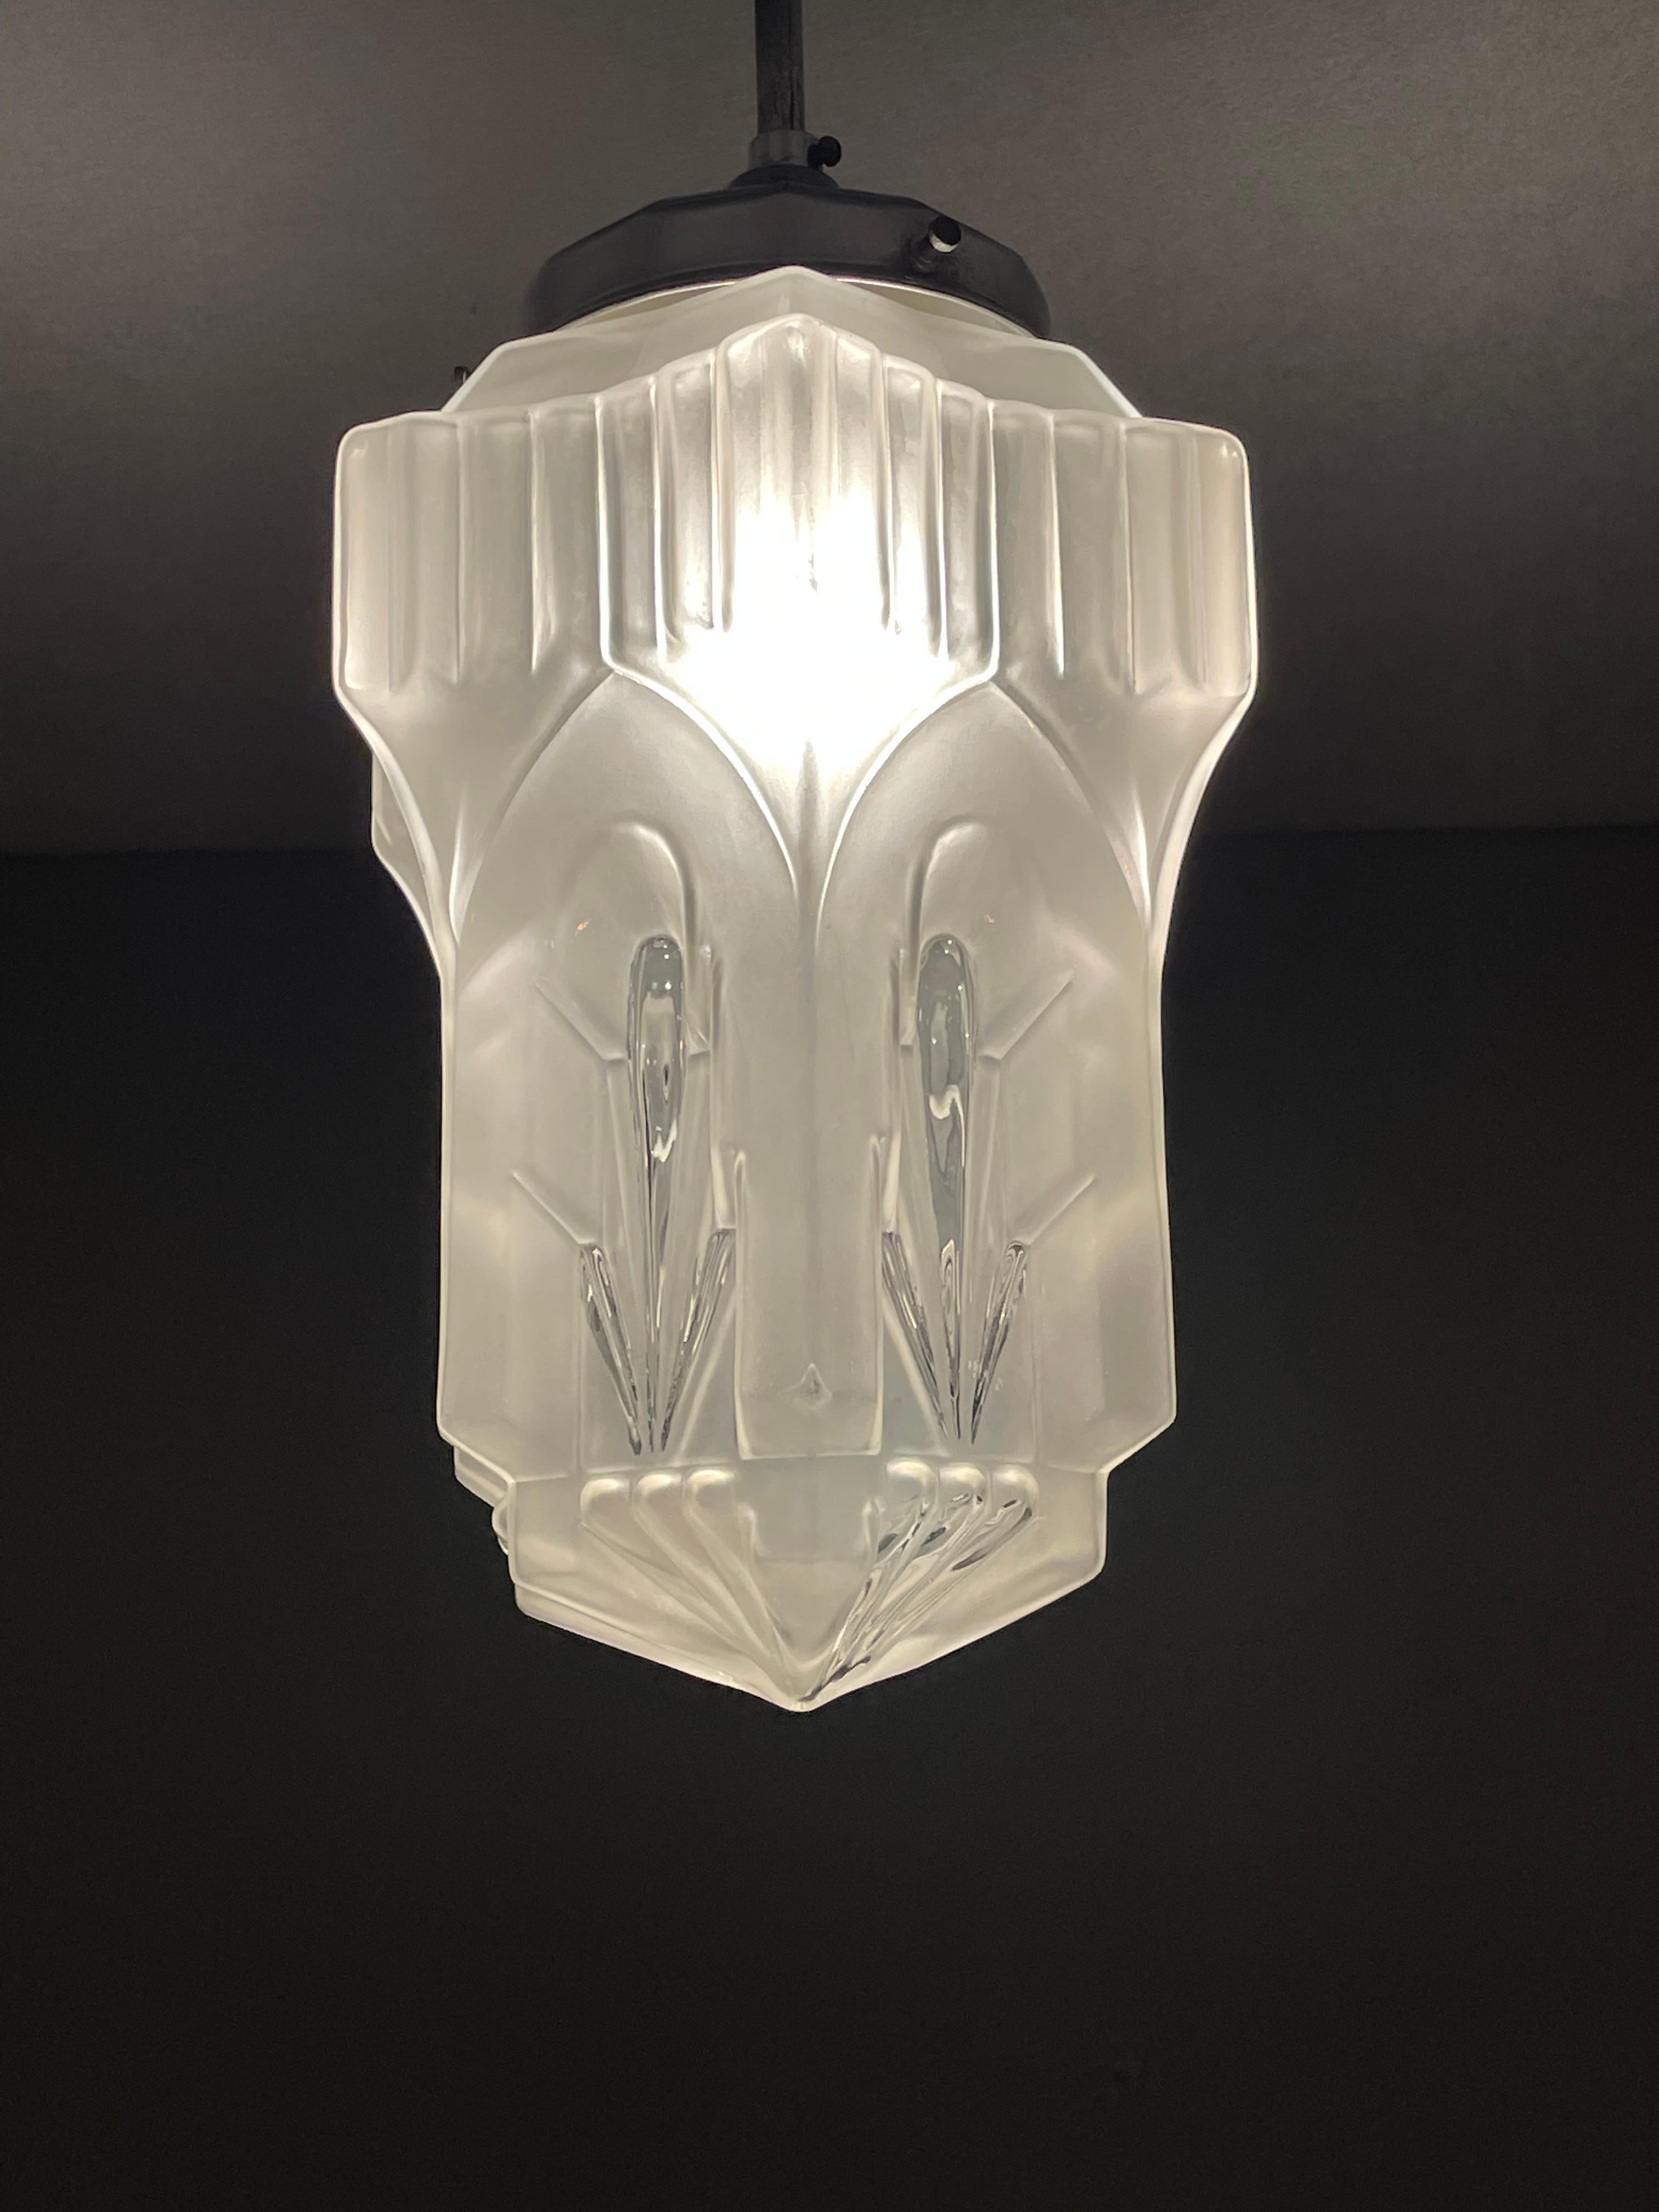 Stunning French, Antique Gothic Art Deco Design, Chrome Metal Pendant Light 1920 In Excellent Condition For Sale In Lisse, NL